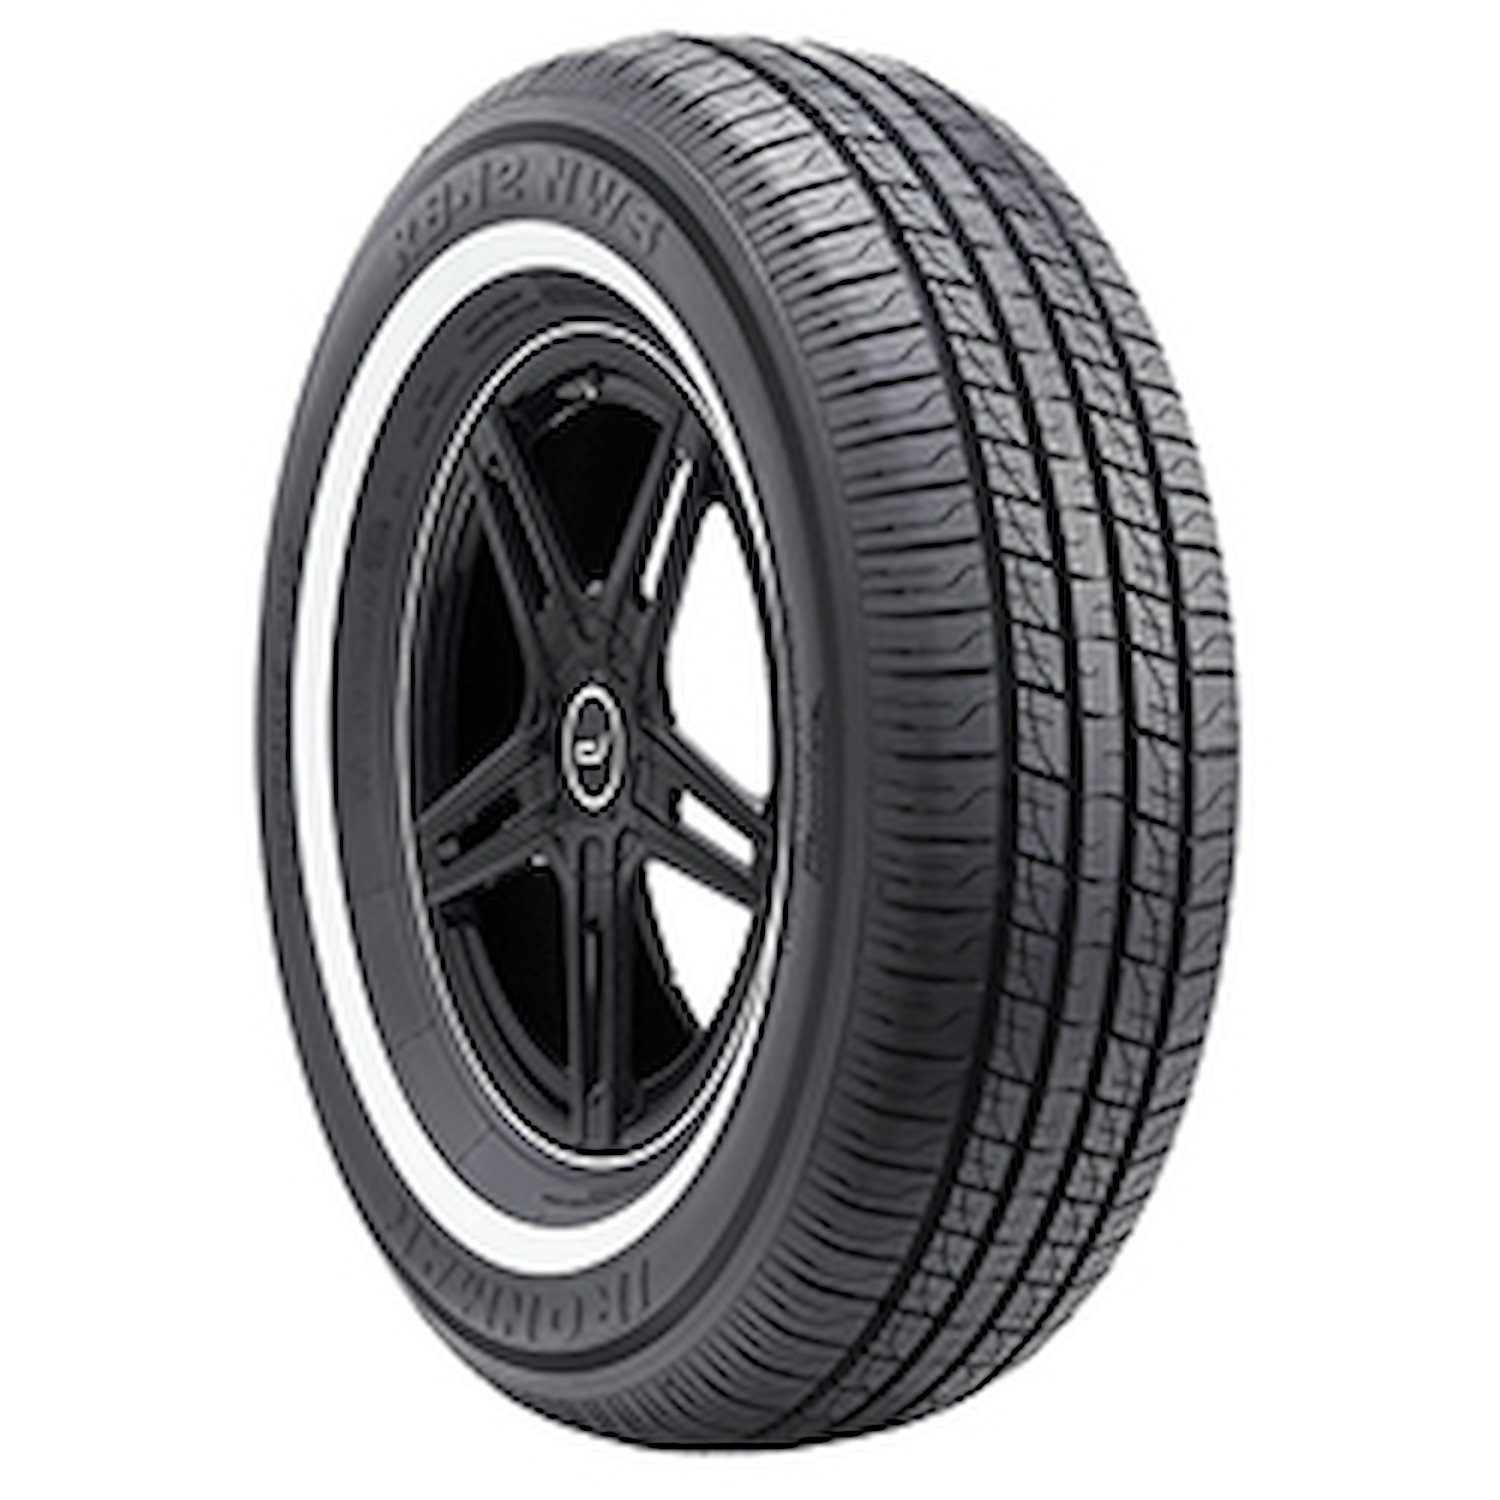 RB-12 NWS Tire, 235/75R15 105S